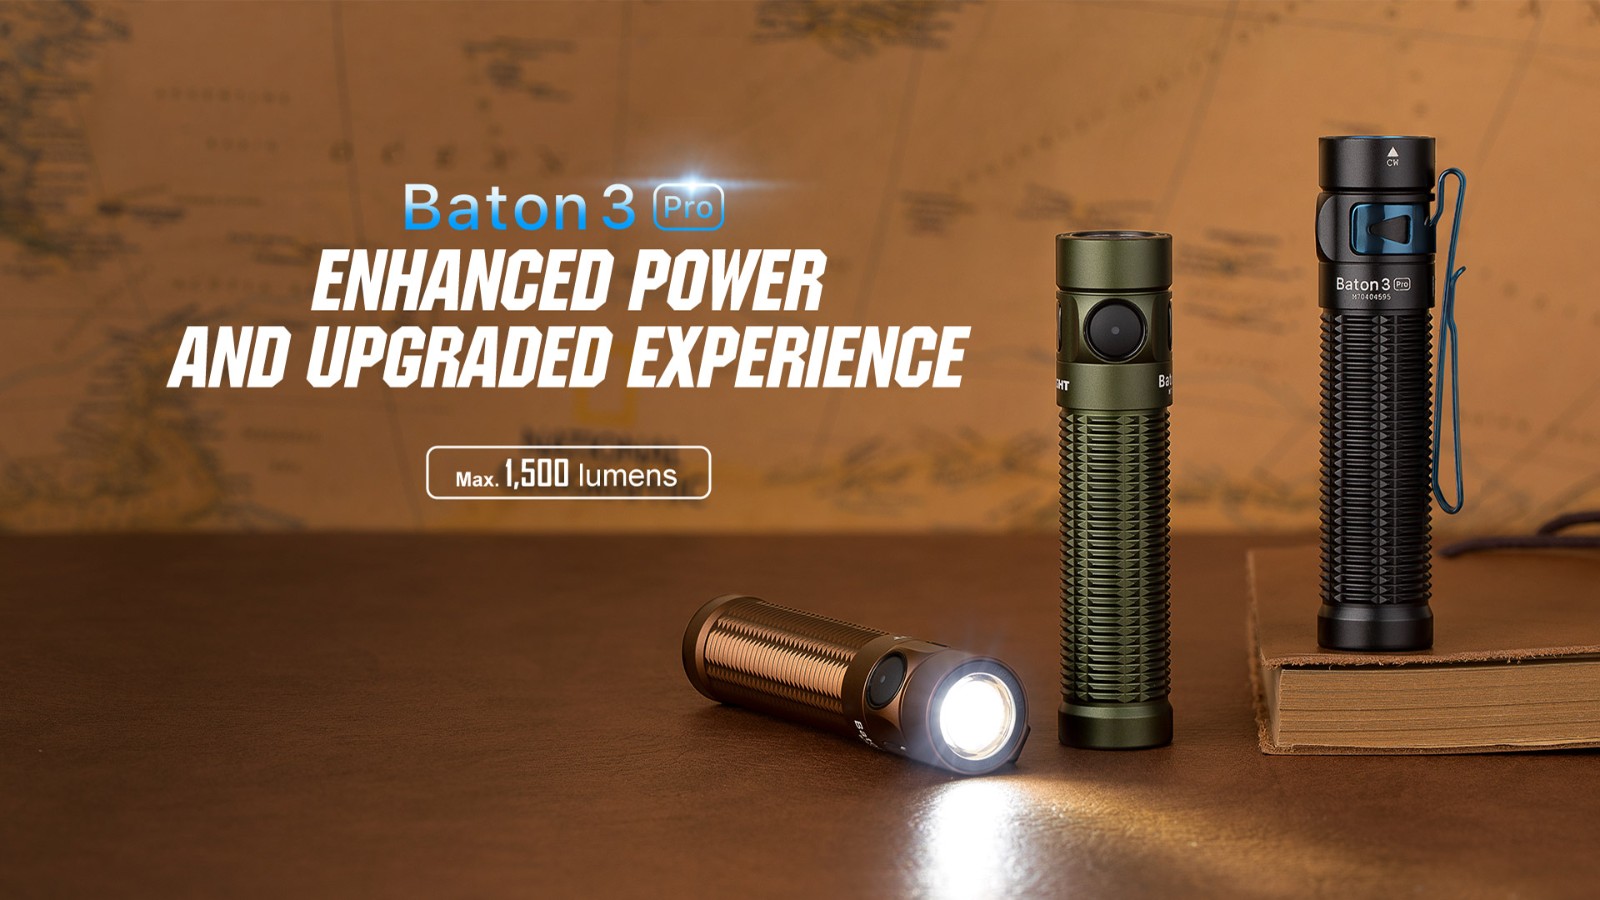 Enhanced power and upgraded experience